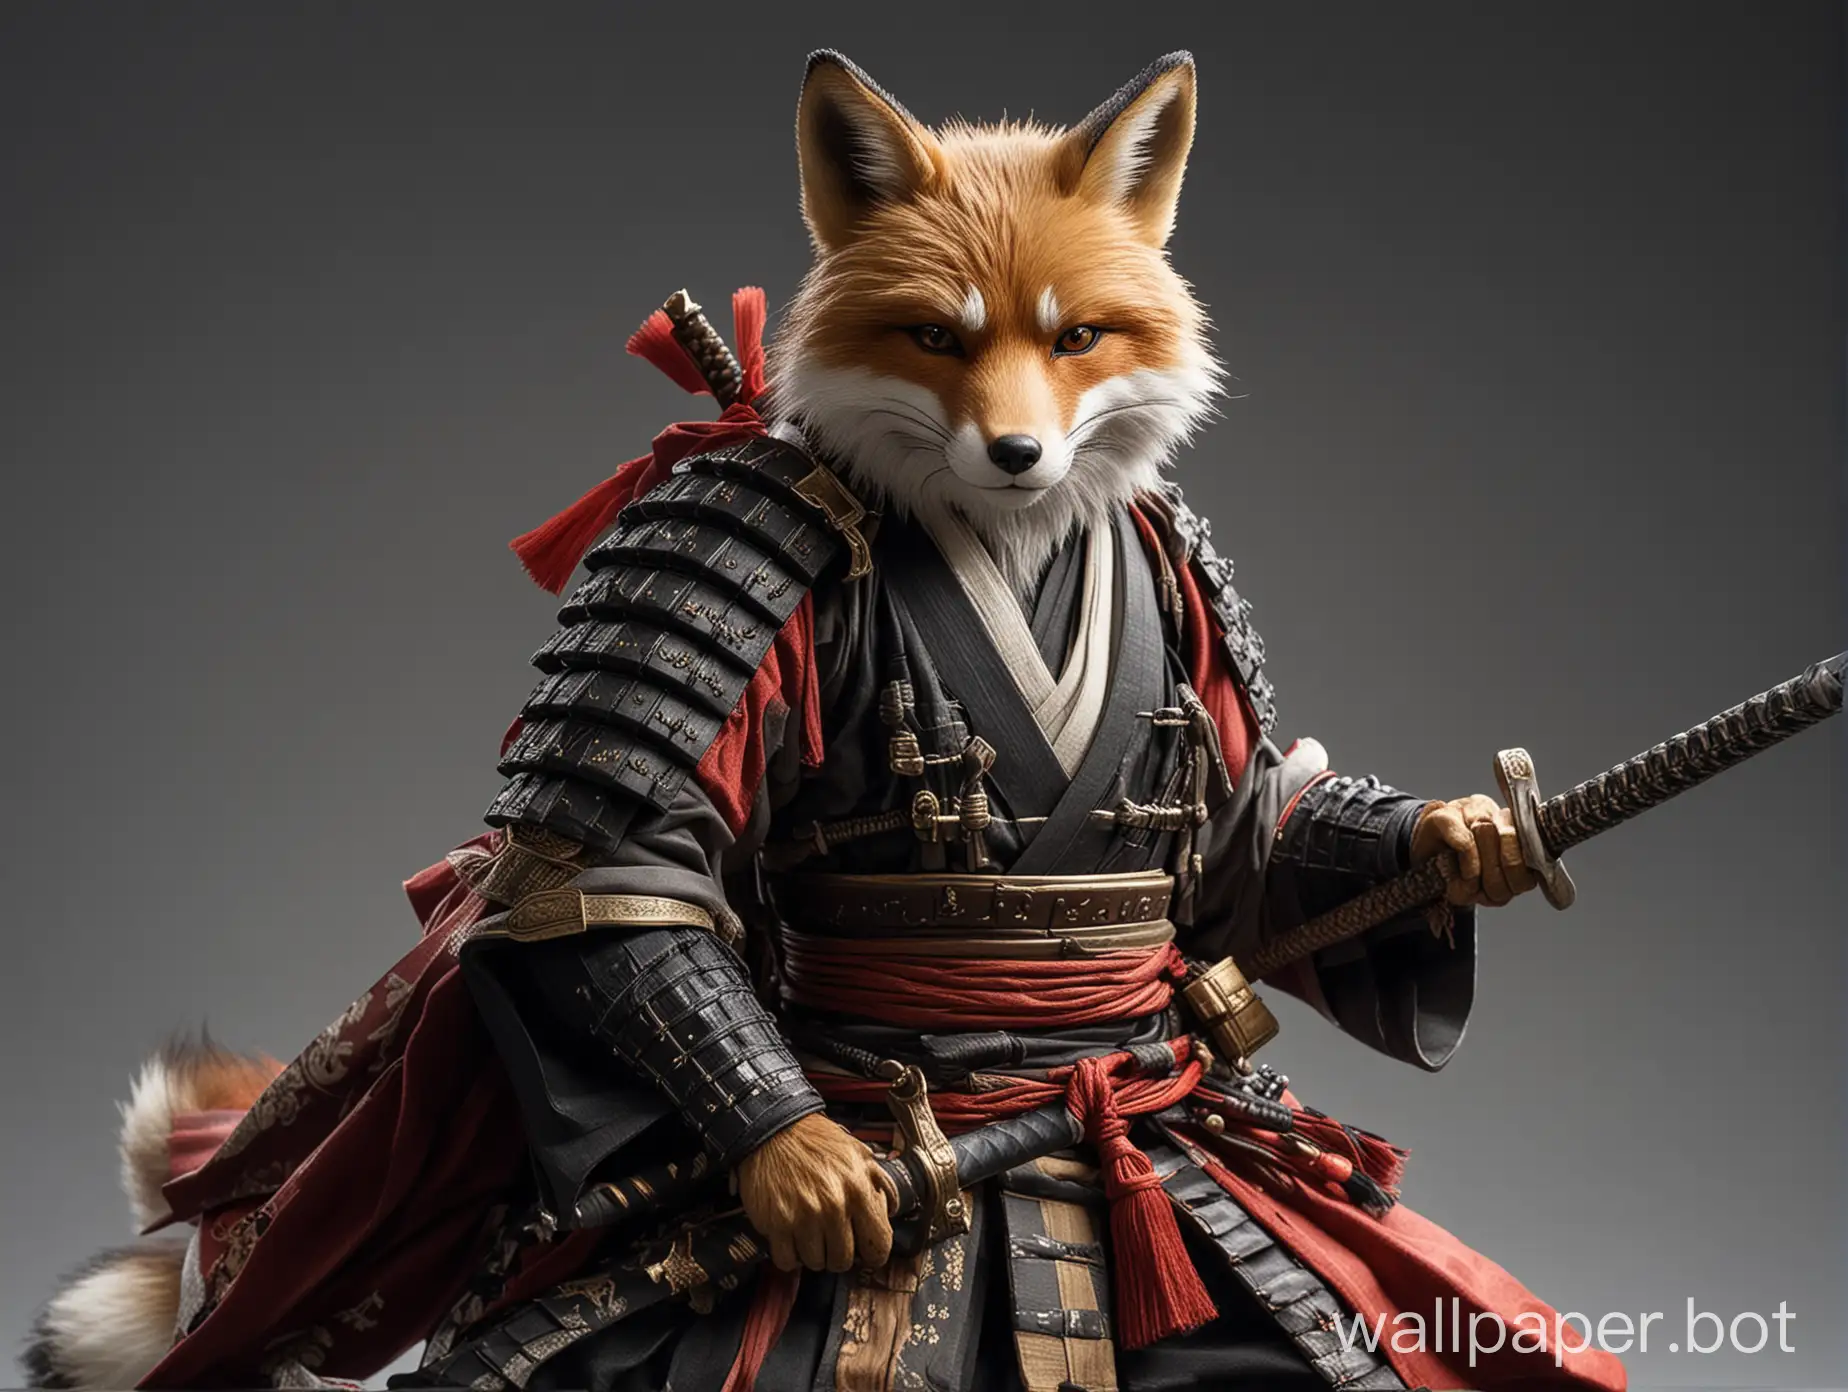 Masterpiece. Best quality. Samurai fox. Human-like fox samurai. Wearing traditional clothes. Ready to strike with a sword.